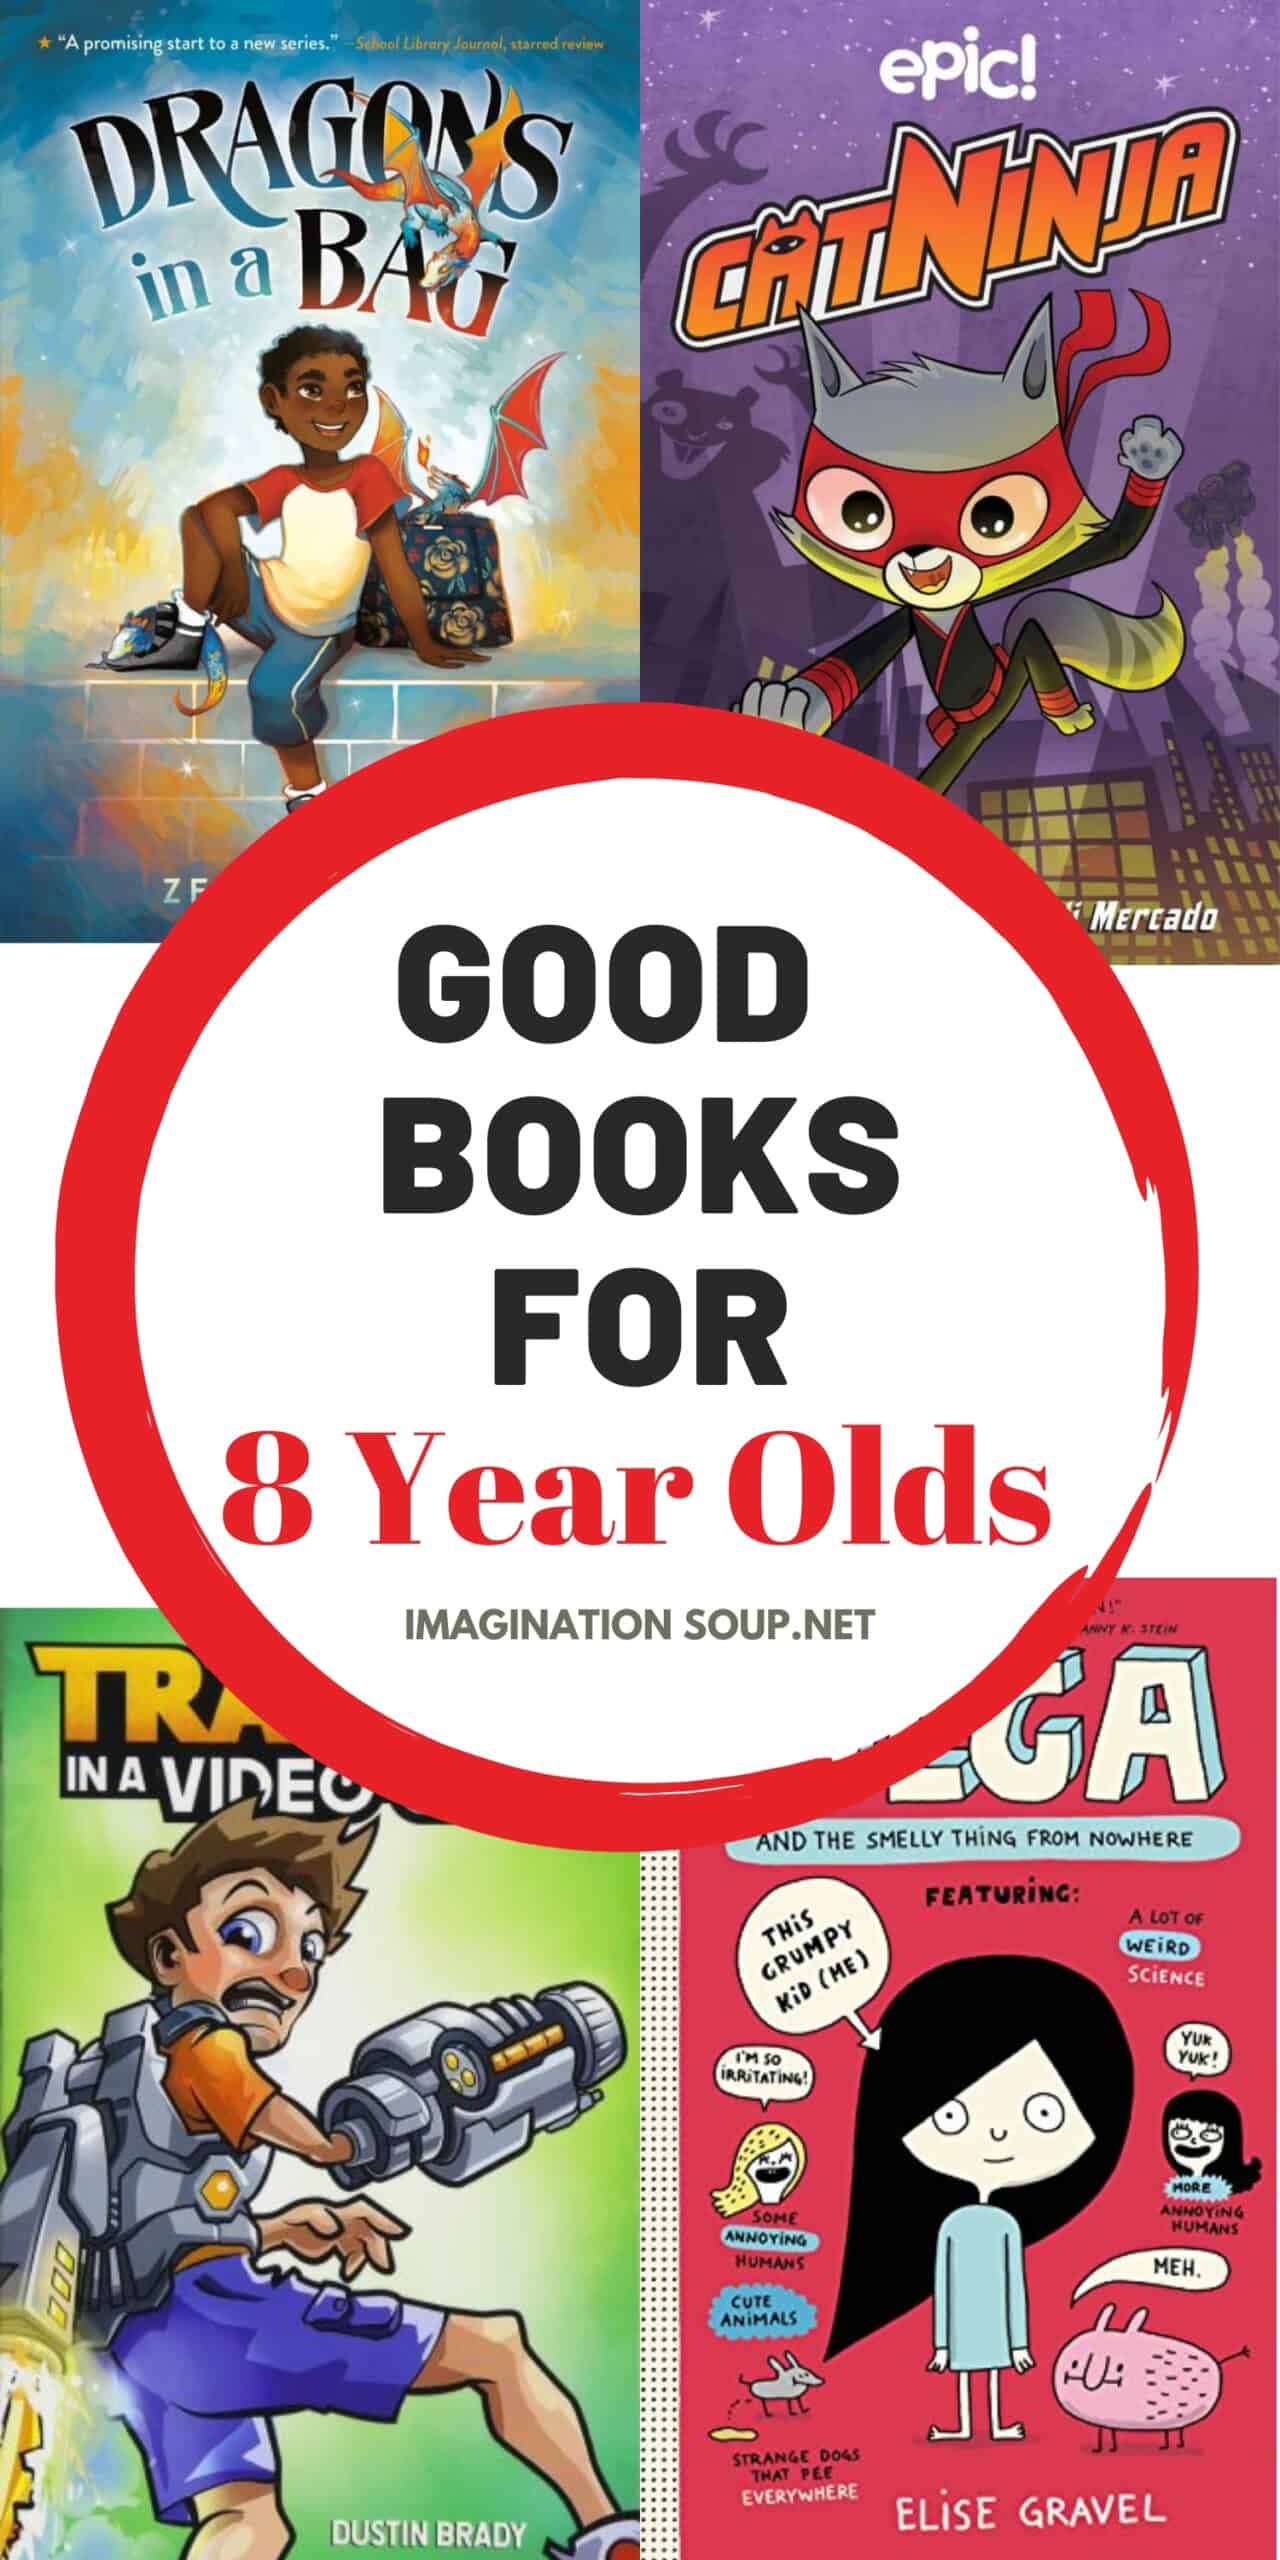 graphic novel books for 8 year olds